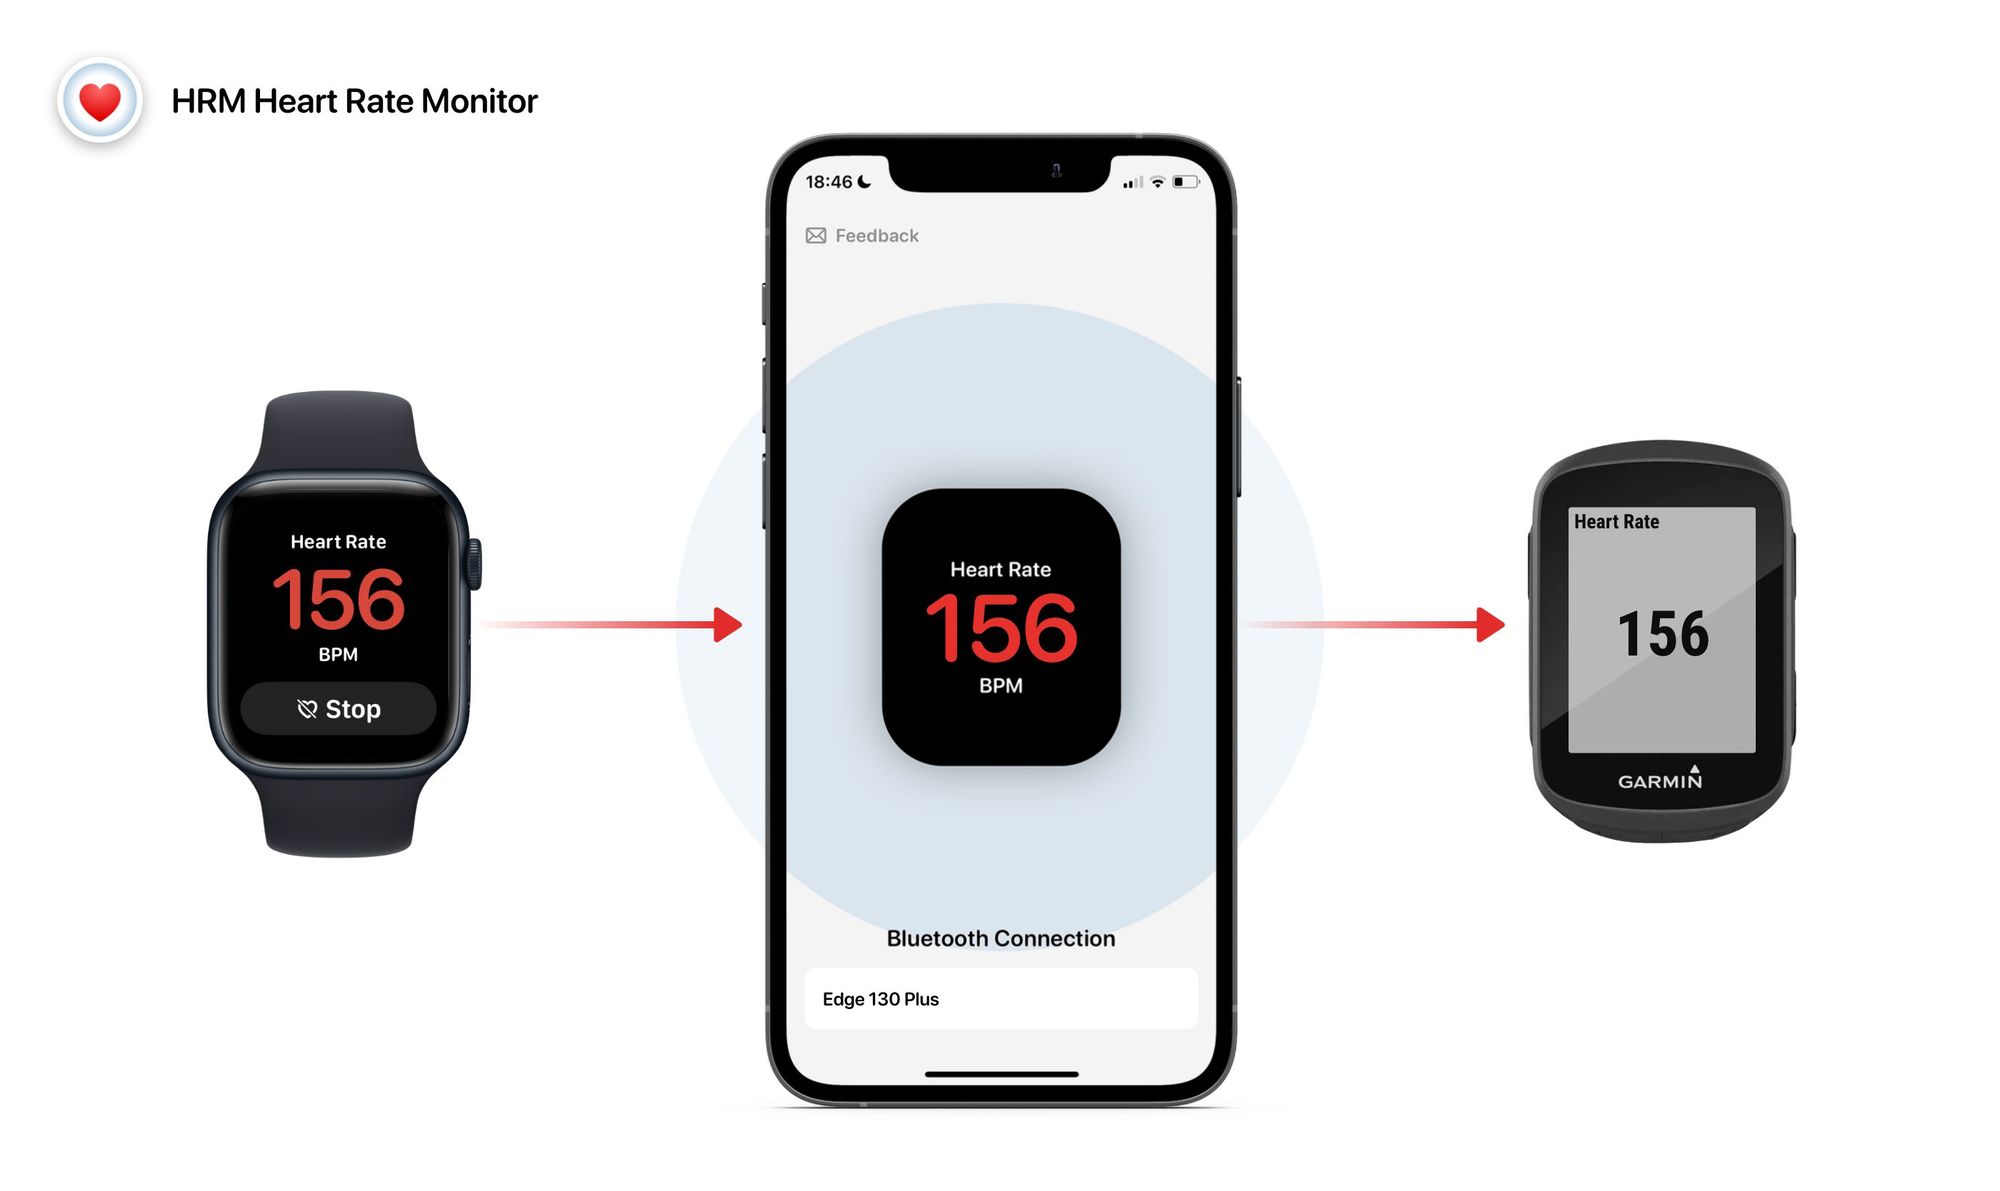 HRM Heart Rate Monitor App User Guide